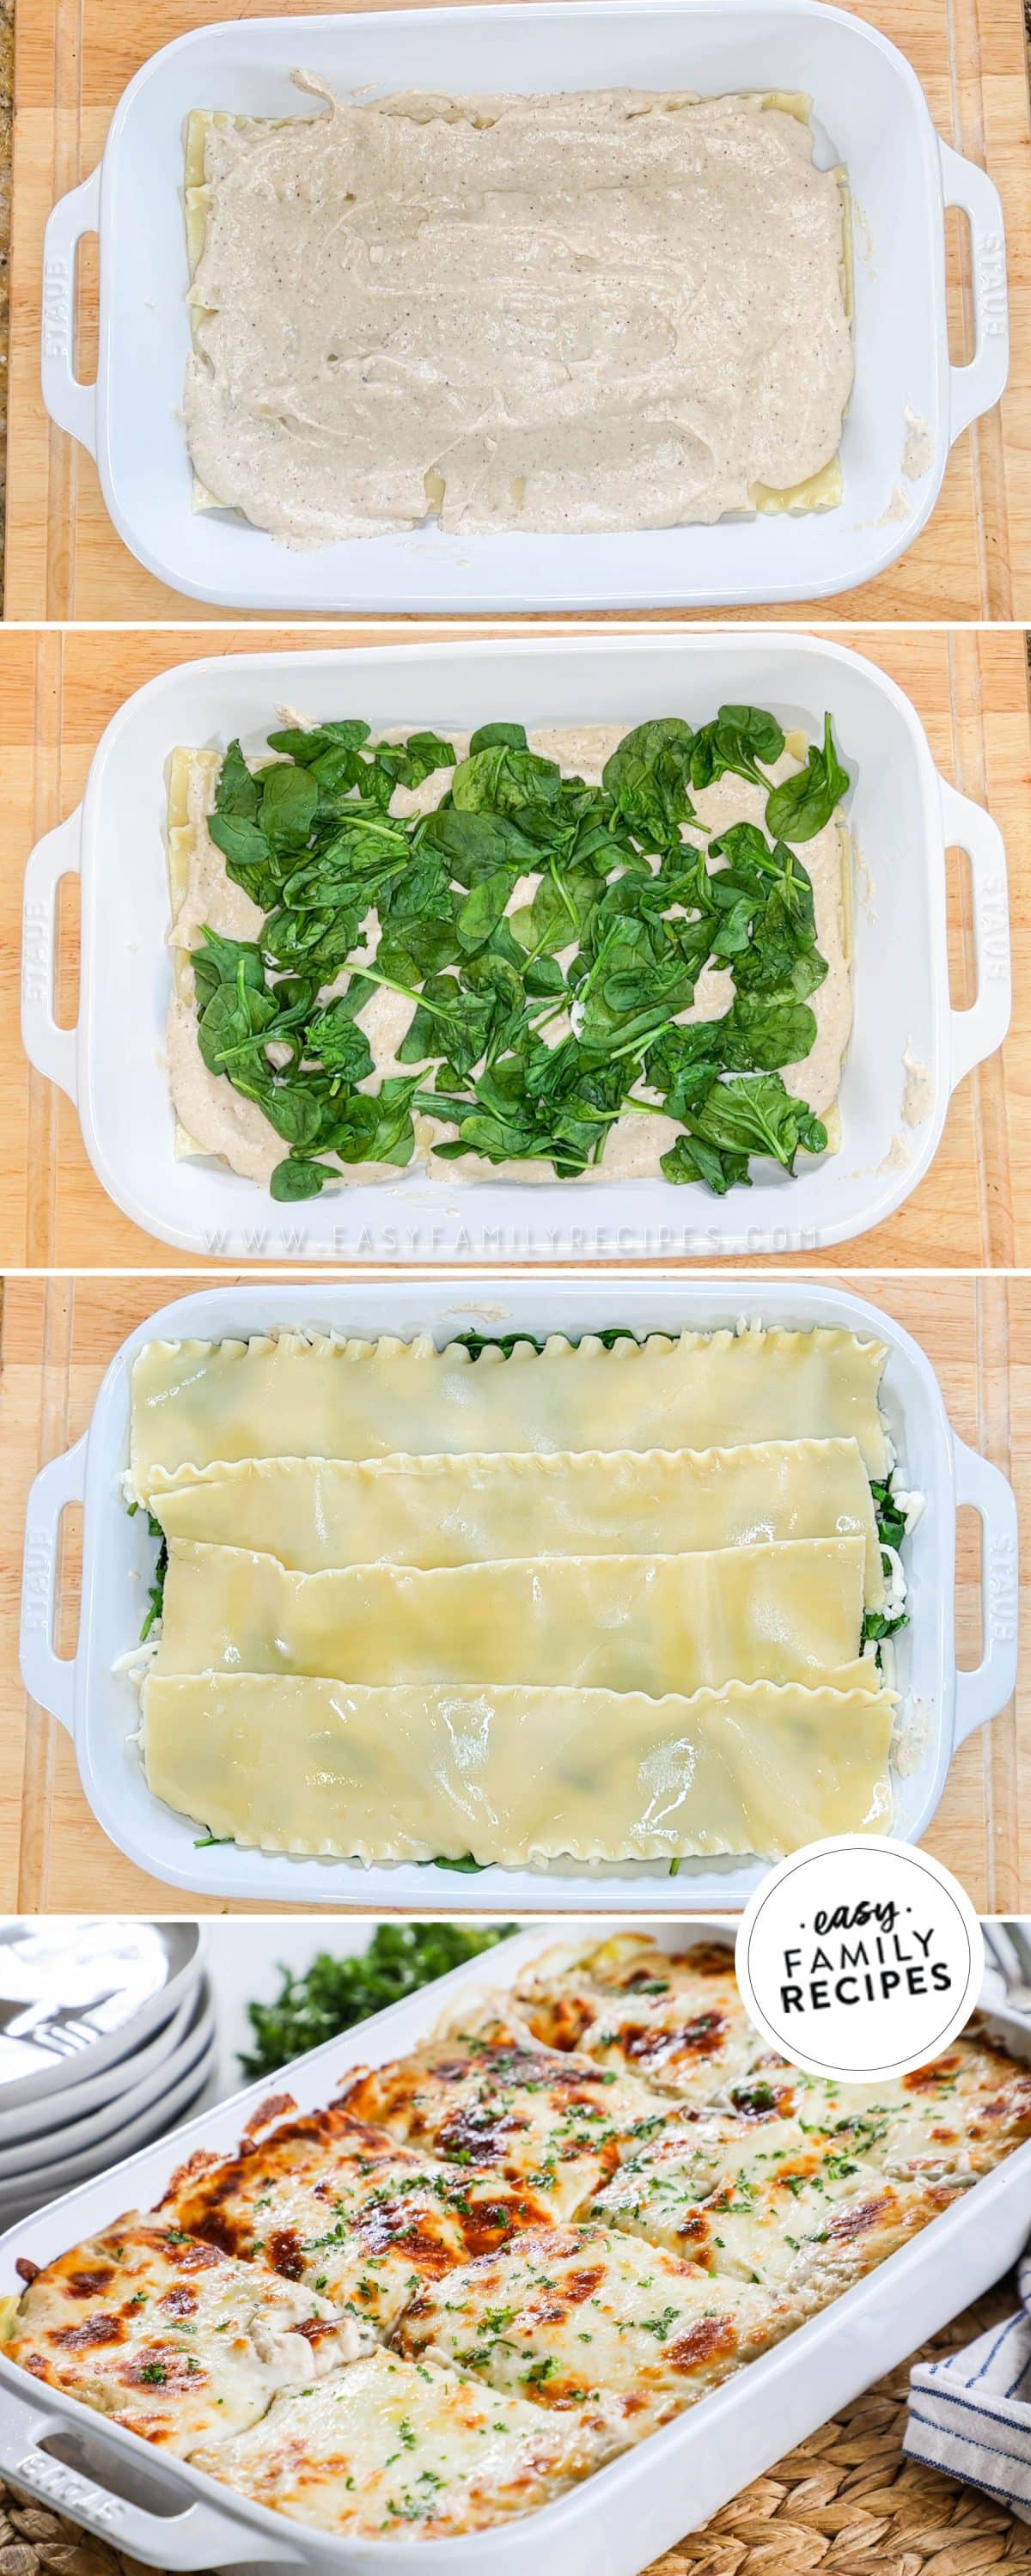 Process photos for how to make spinach lasagna with white sauce- 1. Add a layer of white sauce 2. sprinkle wilted spinach over the white sauce. 3. add a layer of lasagna noodles. 4. Repeat and bake.